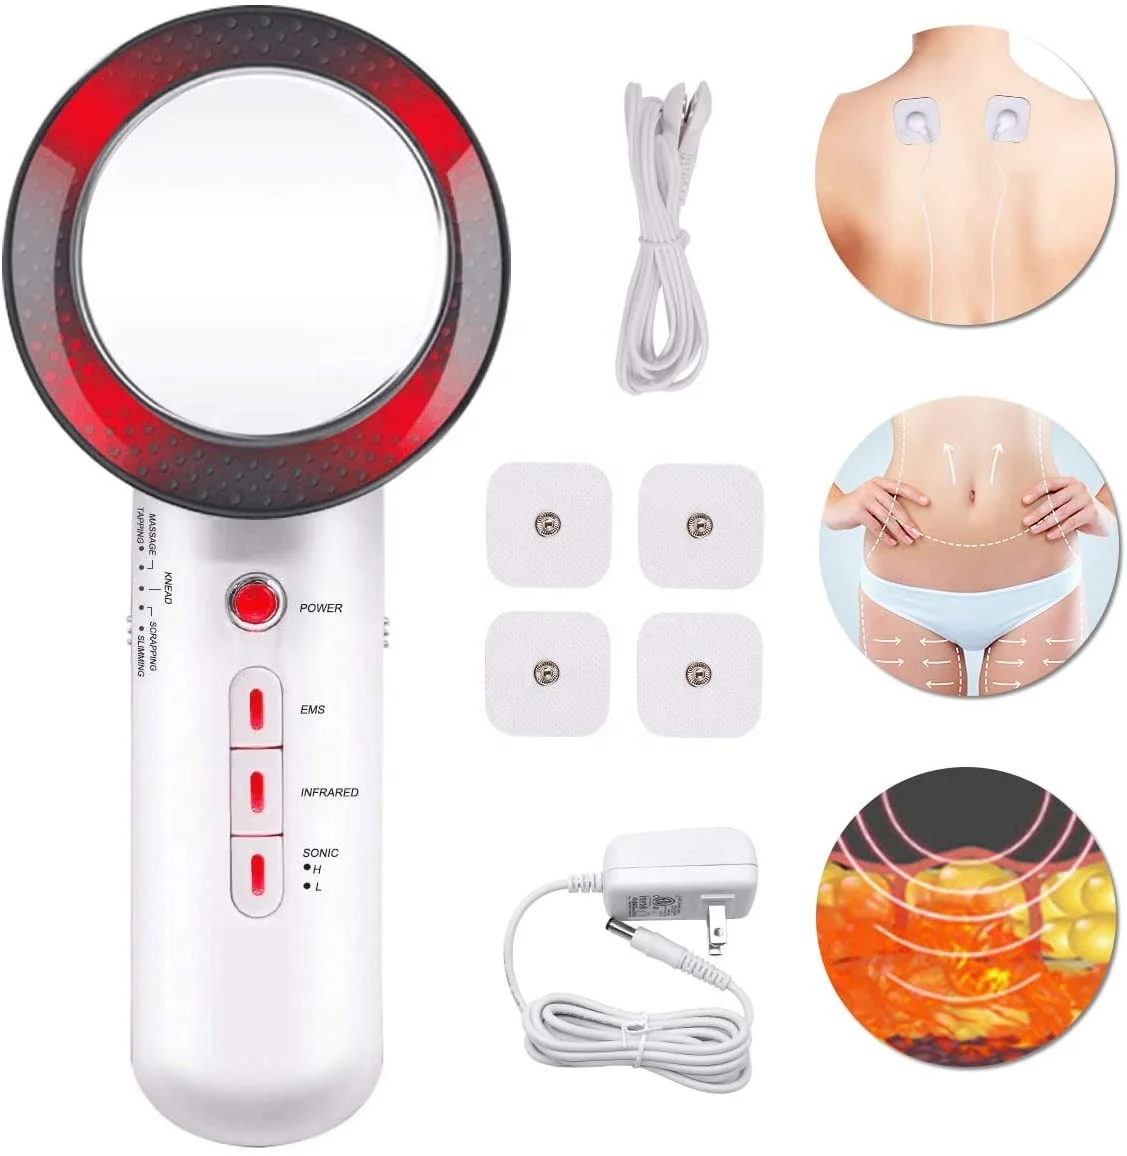 

Wholesale Skin Tightening Weight Loss Ultrasonic Body Shaping Slimming Massager Device For Arms Waist Hip Legs